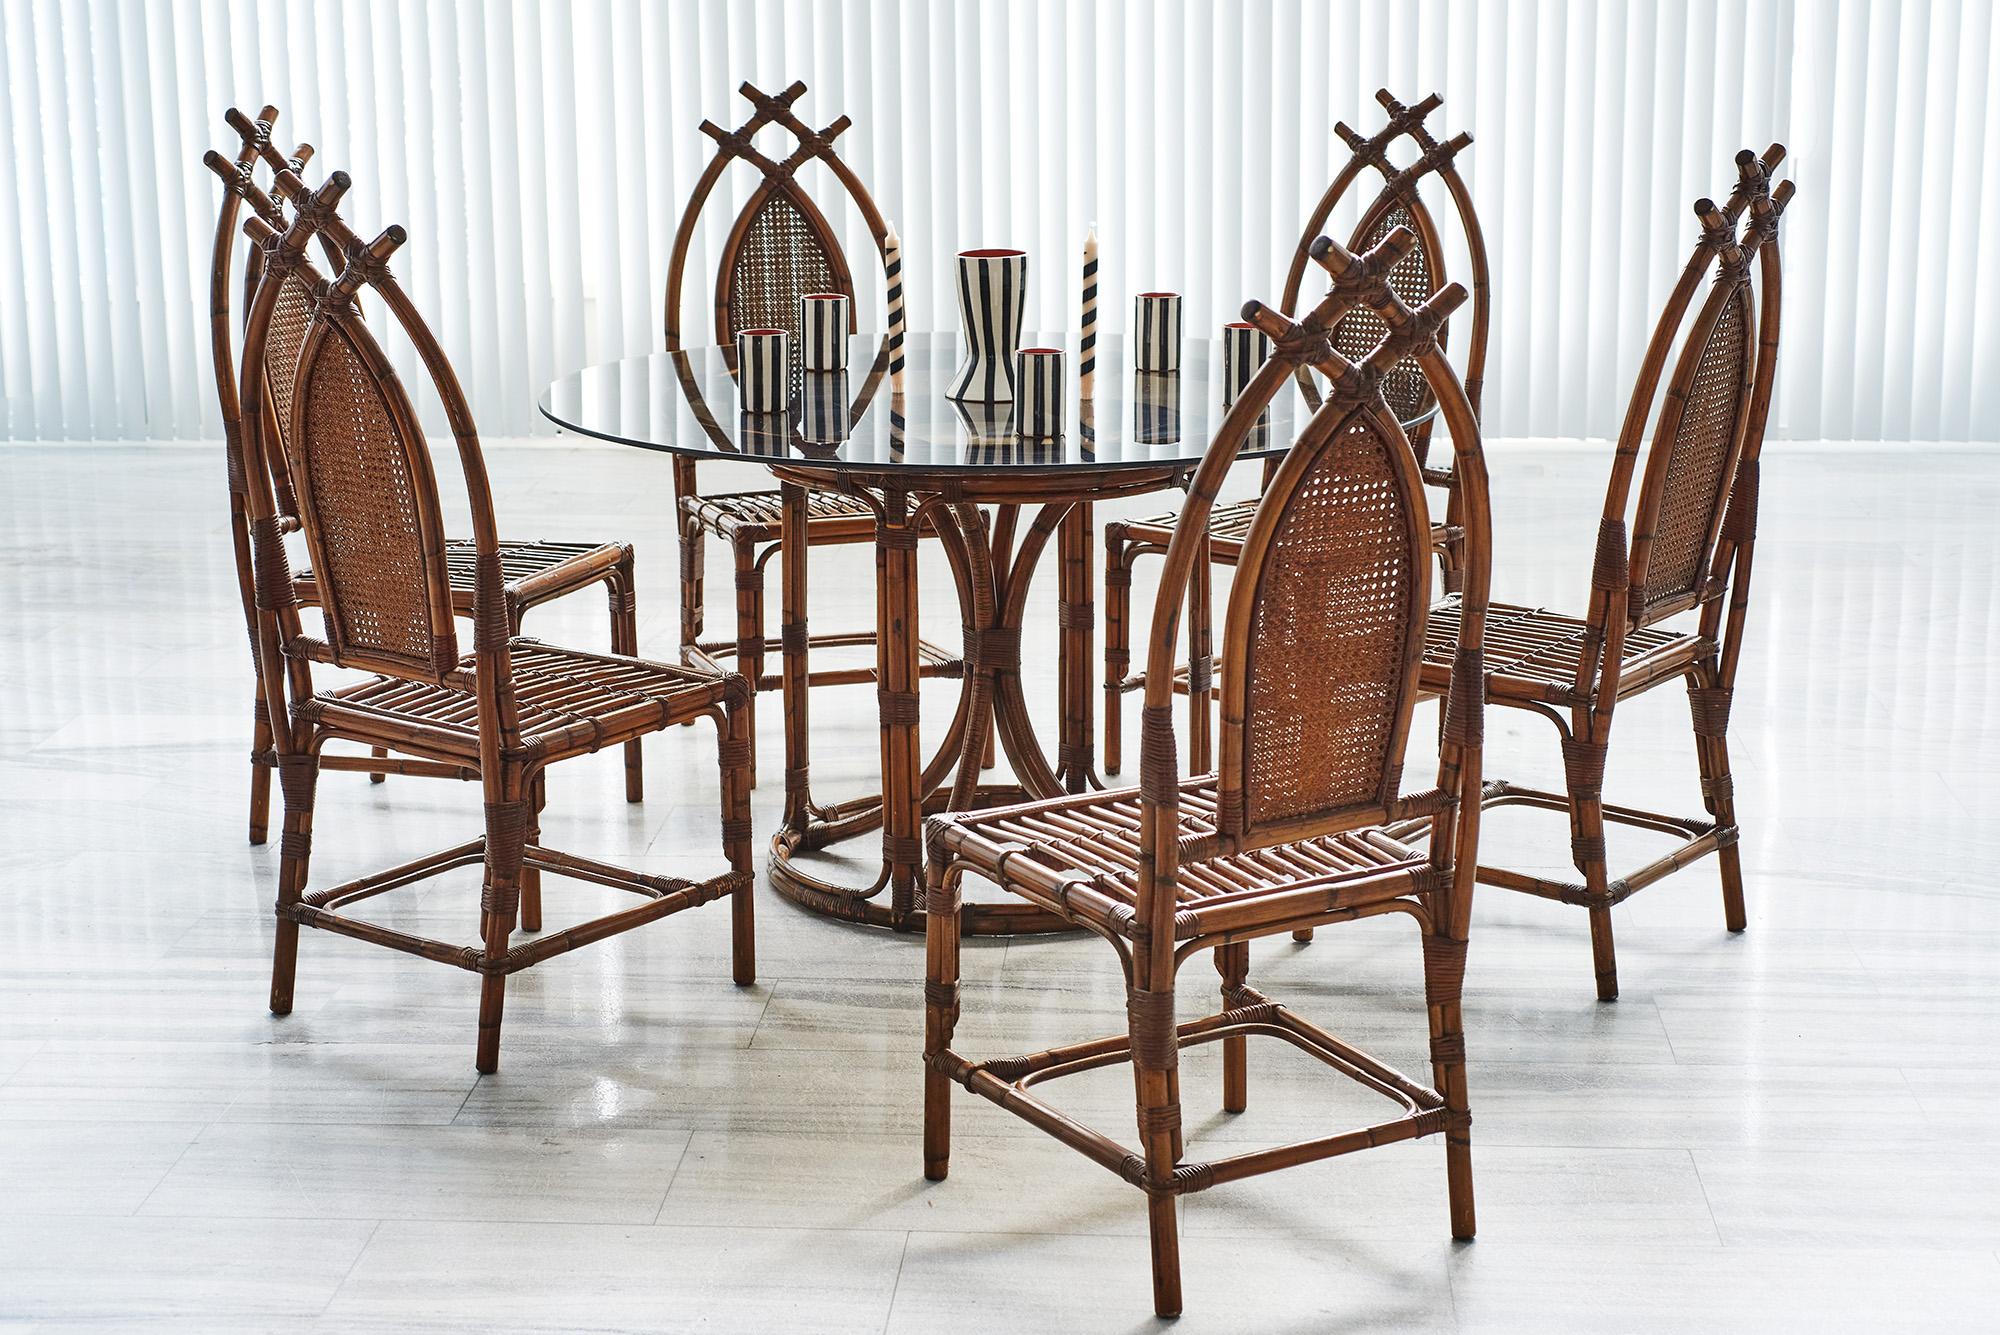 Vintage bamboo dining set of six.
Beautifully crafted bamboo dining set for 6 people.
Very good vintage condition.